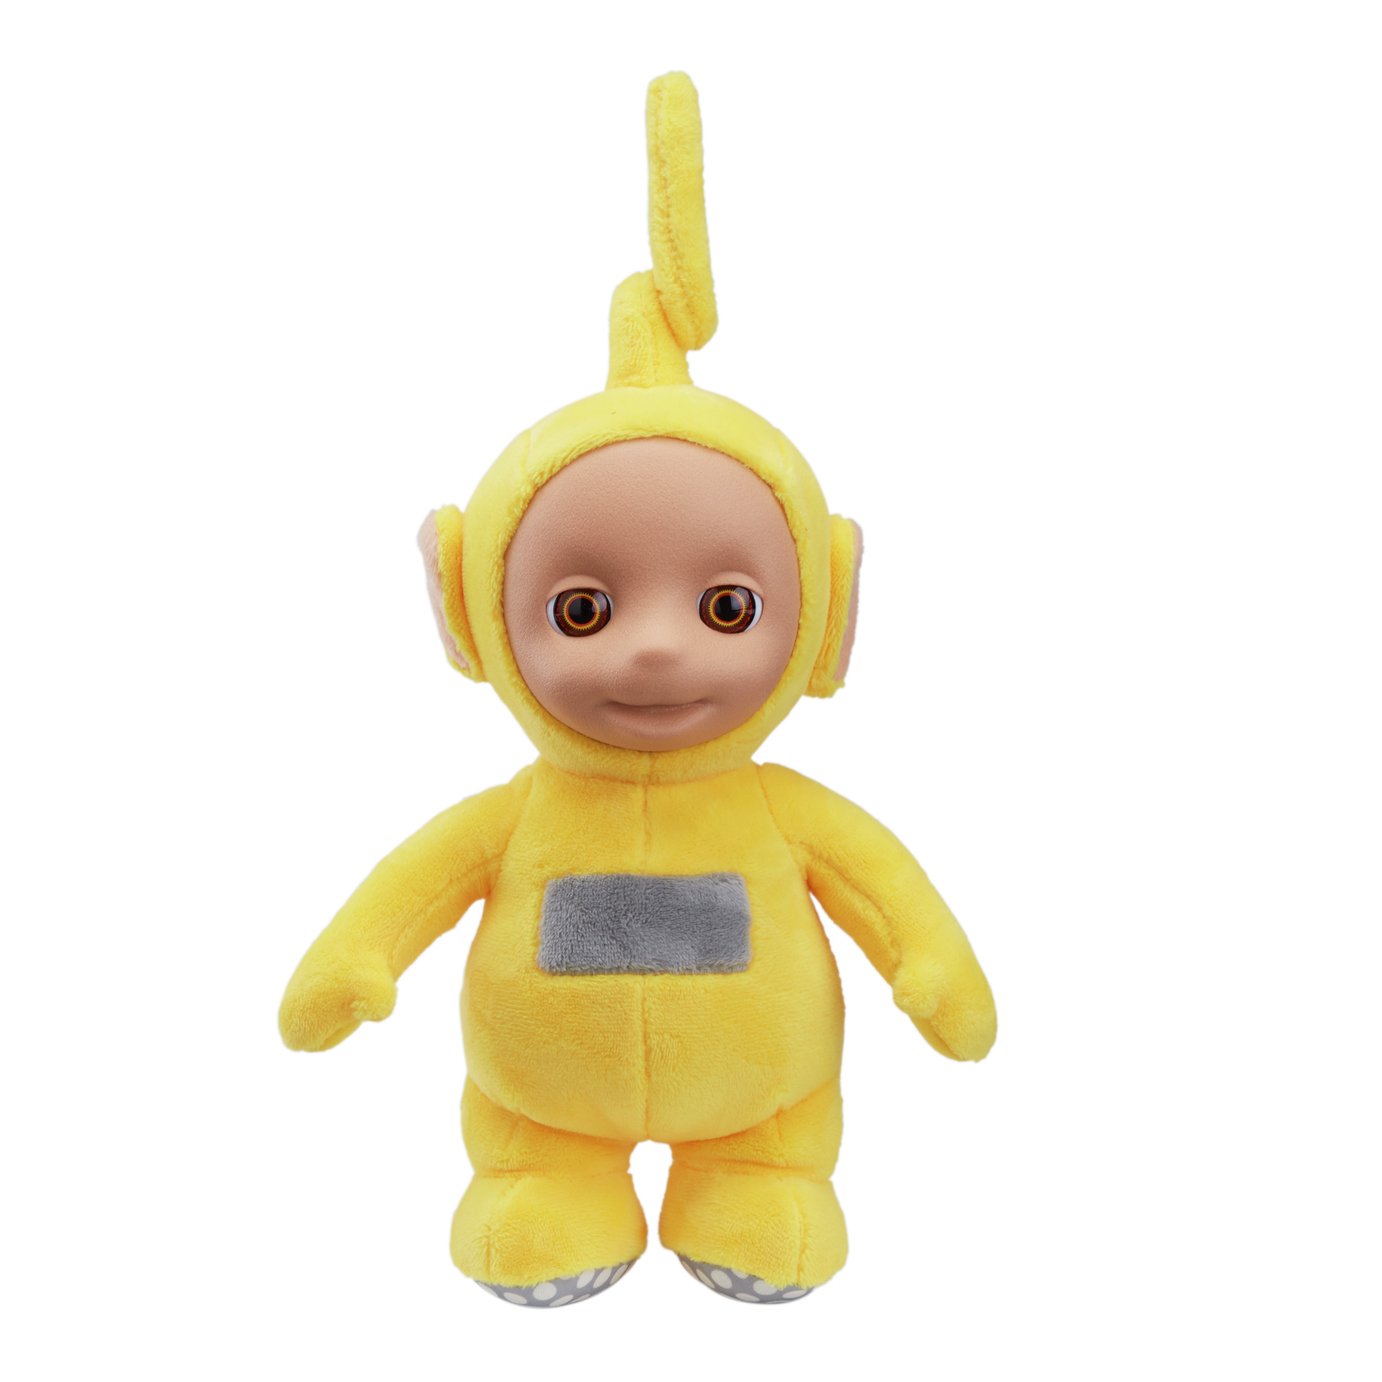 Teletubbies Talking Laa-Laa Soft Toy review